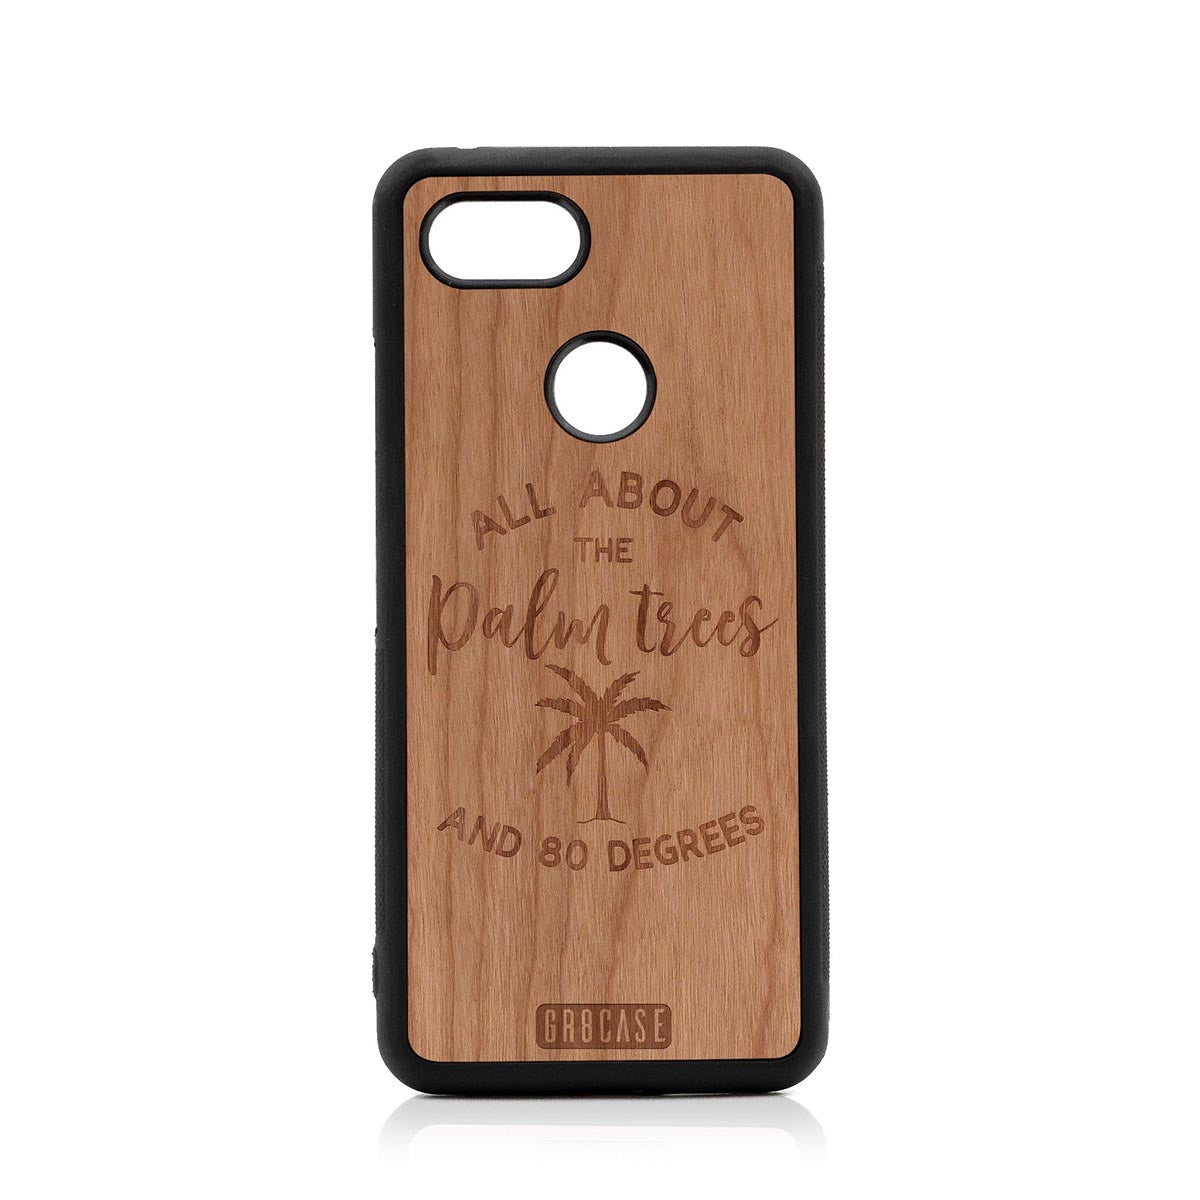 All About The Palm Trees and 80 Degrees Design Wood Case For Google Pixel 3 by GR8CASE